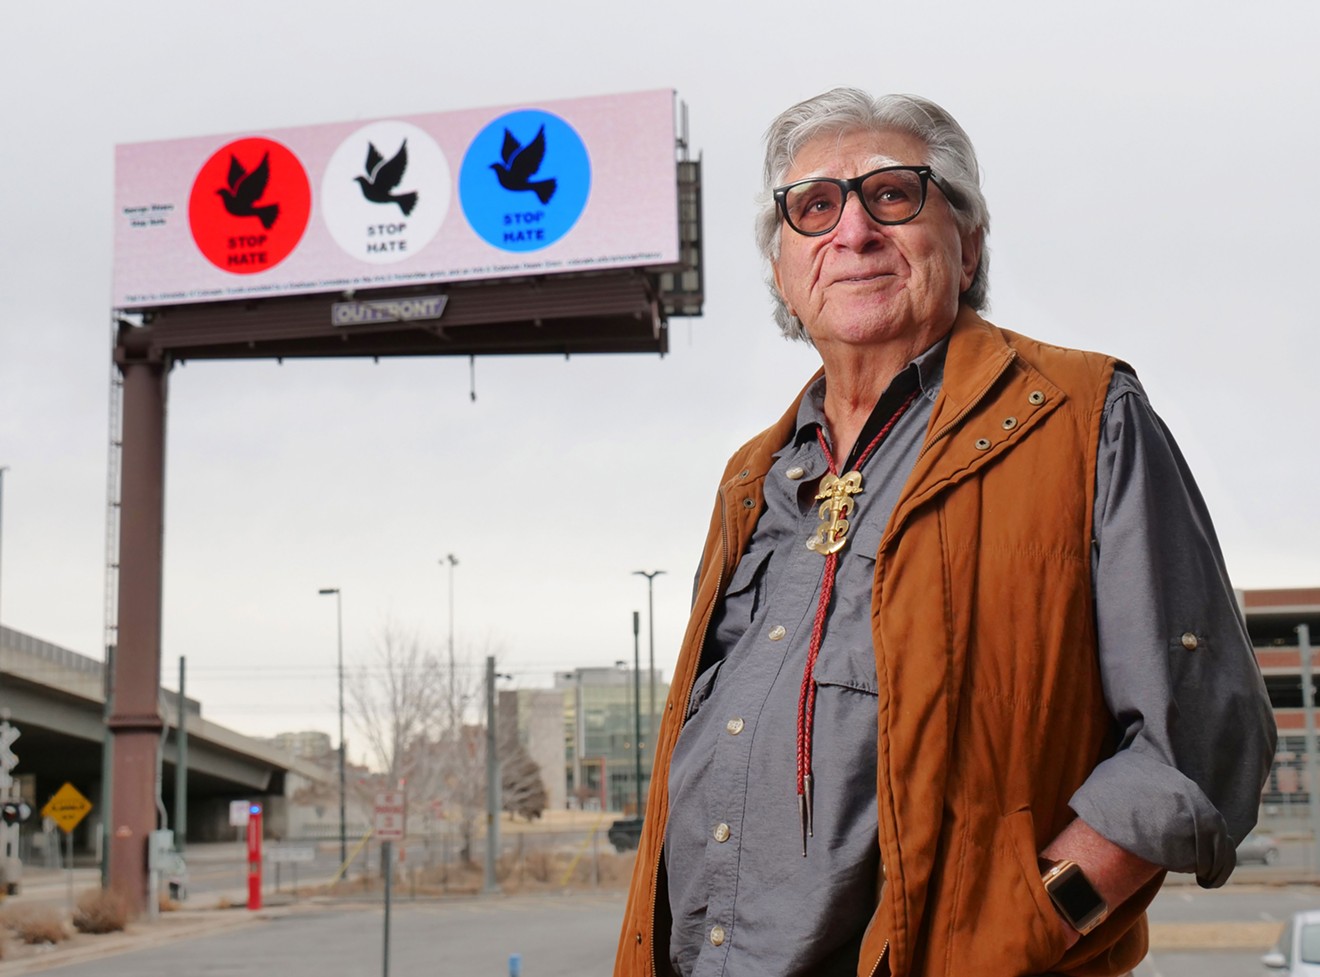 Artist George Rivera stands in front of his “Stop Hate” billboard on the Auraria campus in Denver.